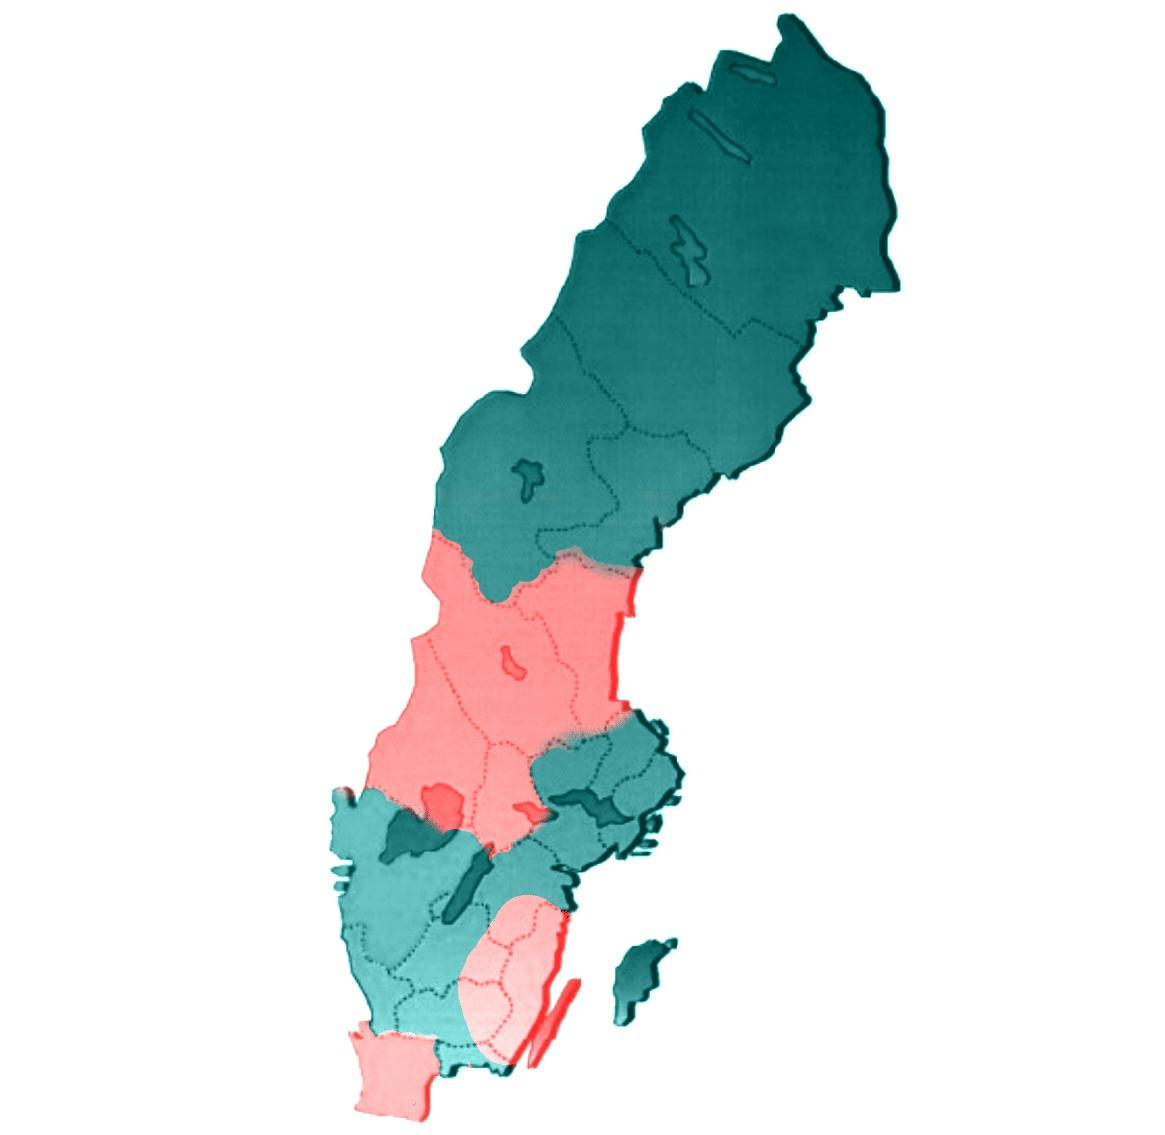 Parts of Sweden covered by the study 257 shoulders were